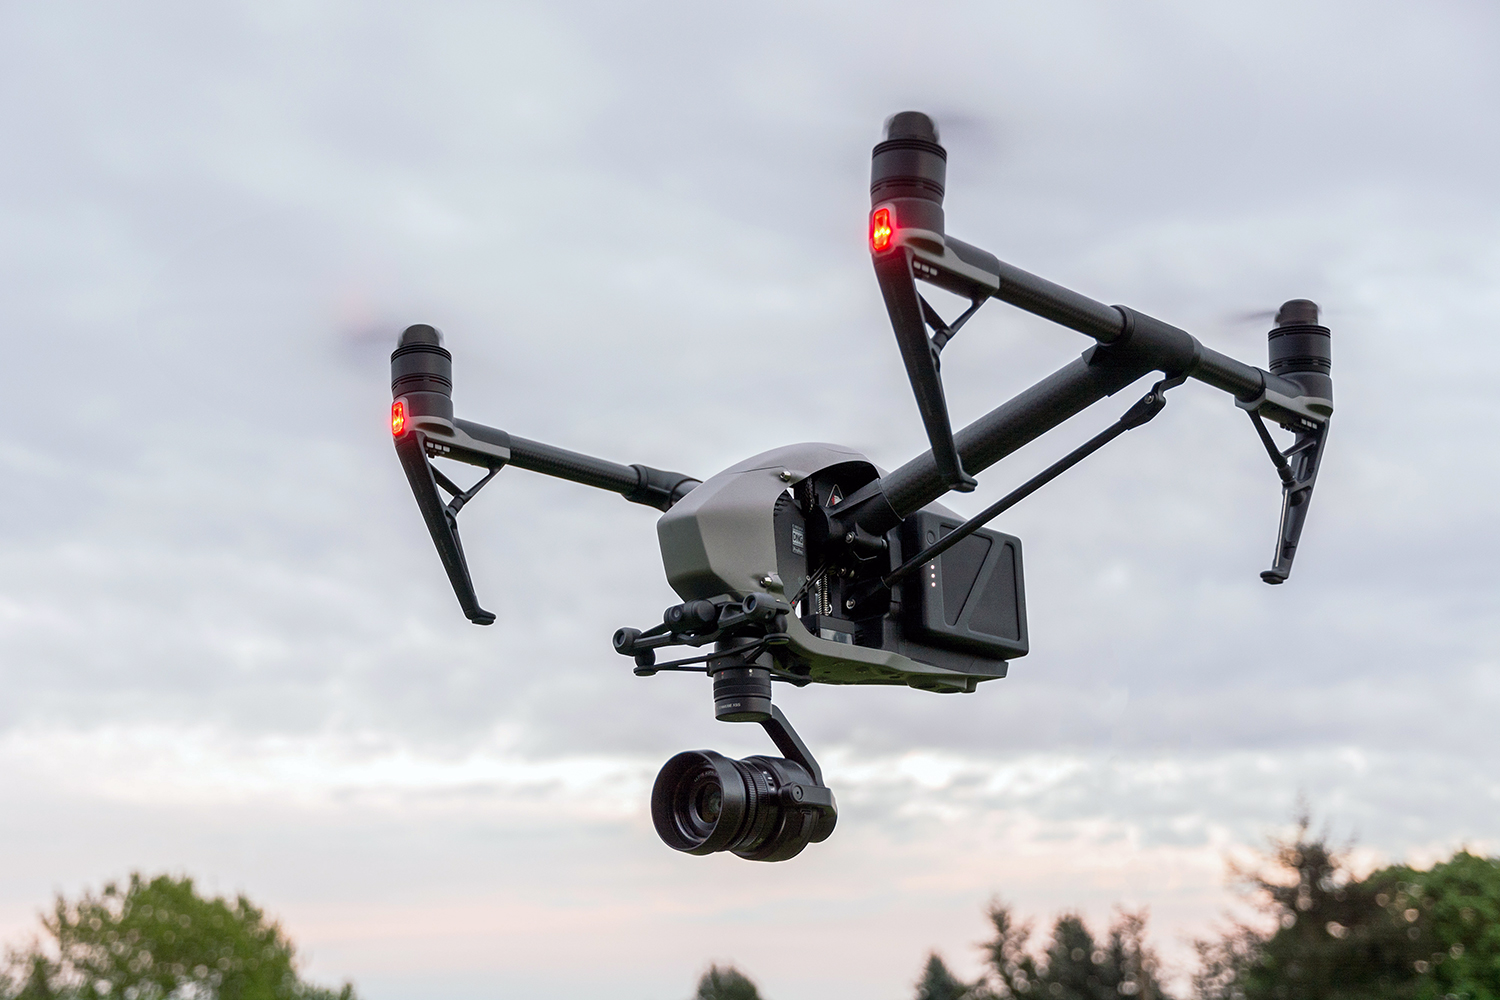 Don’t worry about crashing; DJI’s inspire 2 is practically bolted to the sky